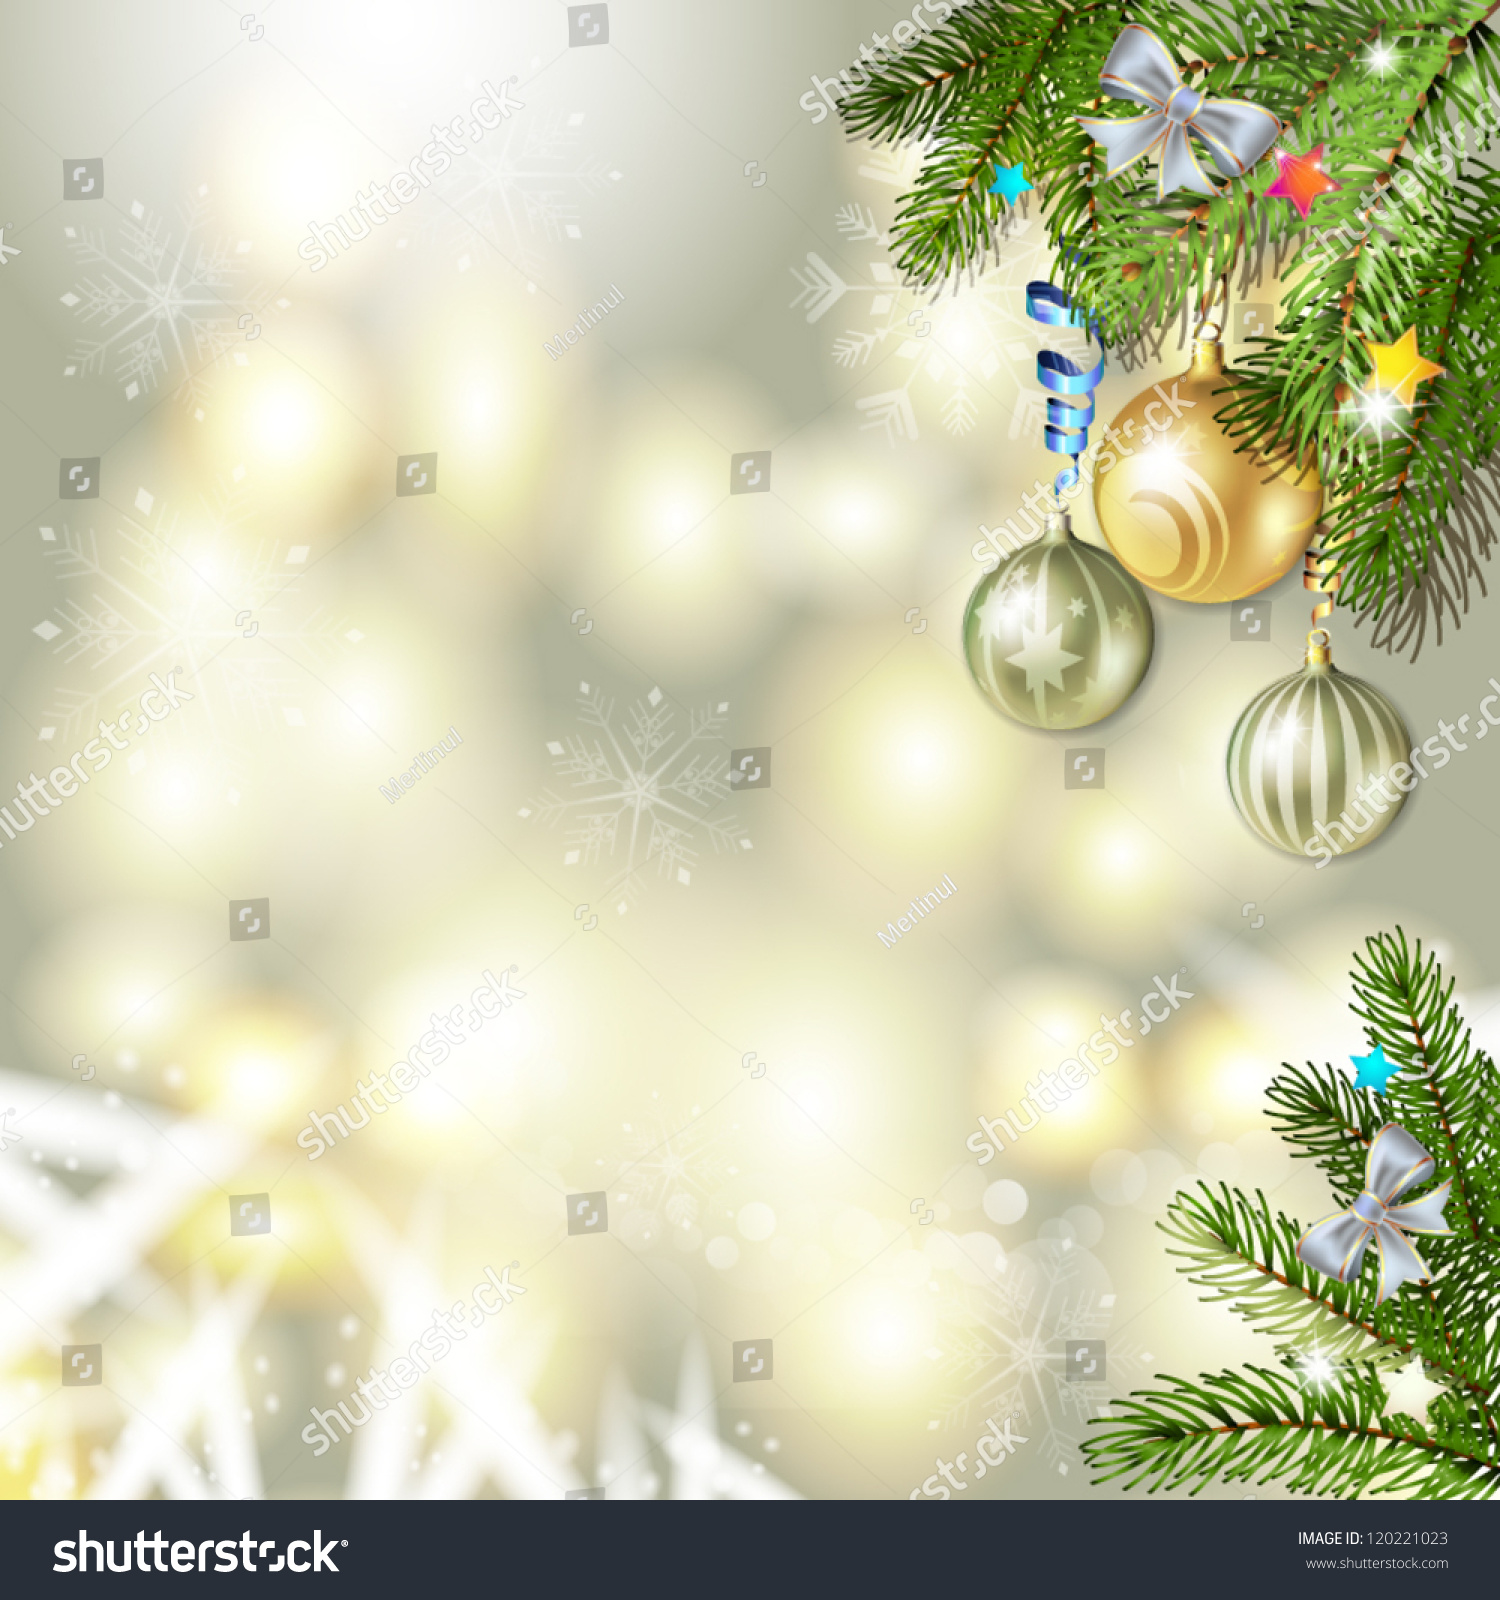 Christmas background with balls and pine tree branch #120221023